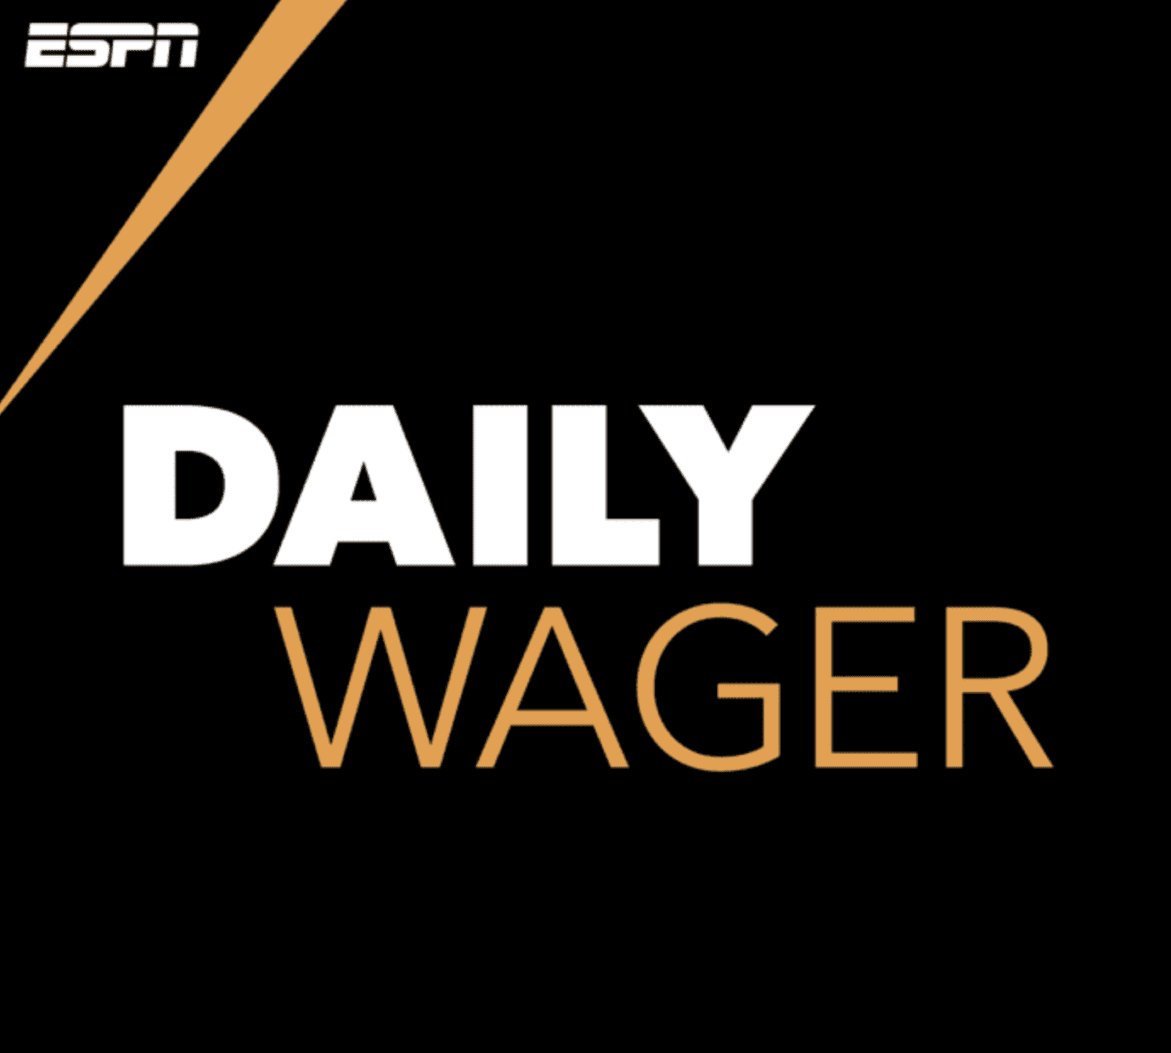 Black Podcasting - Daily Wager Podcast 1/28